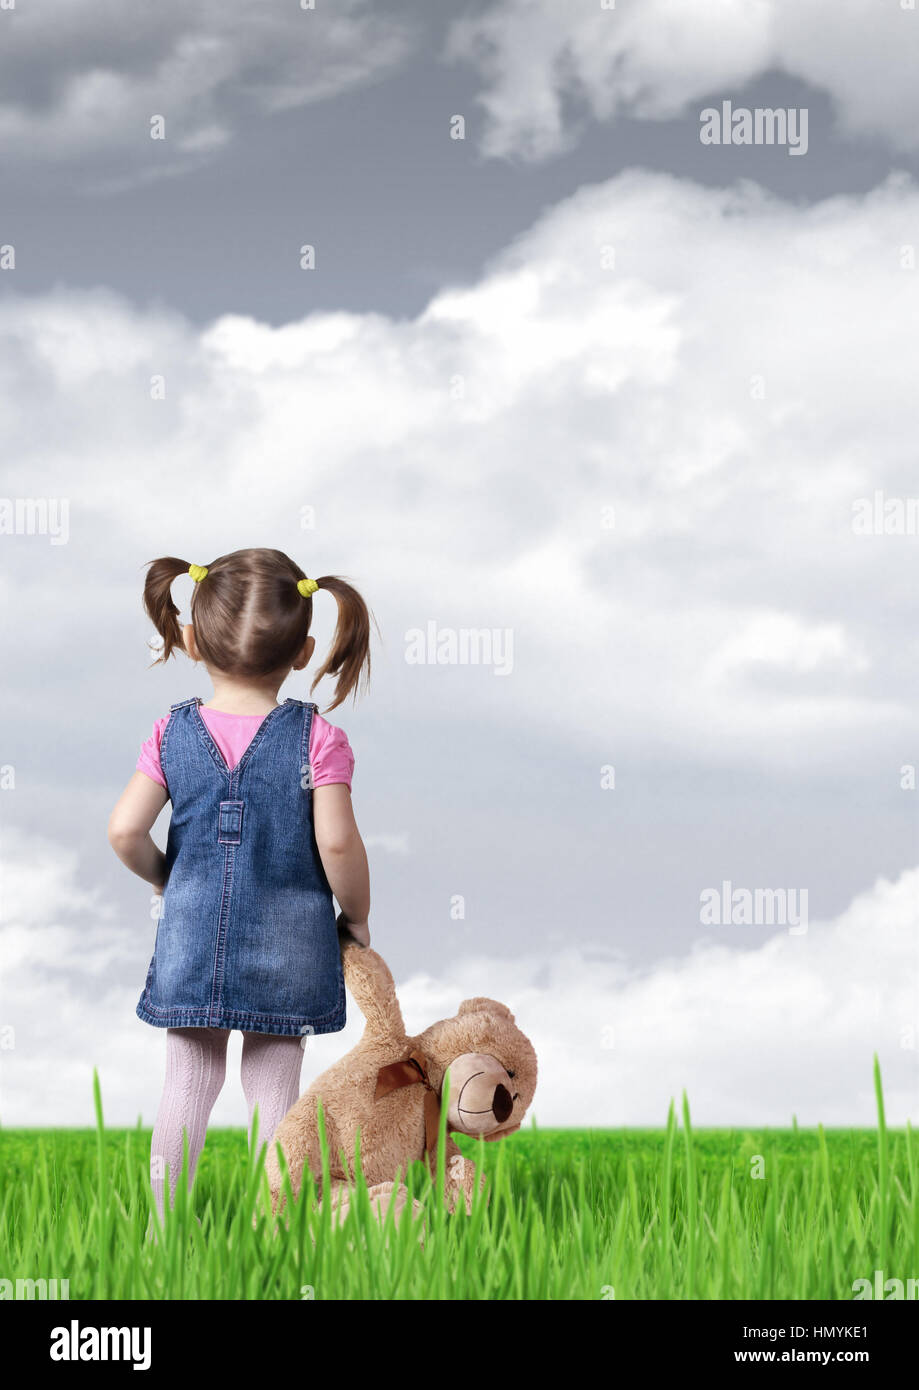 Child girl looking into the distance, back view Stock Photo